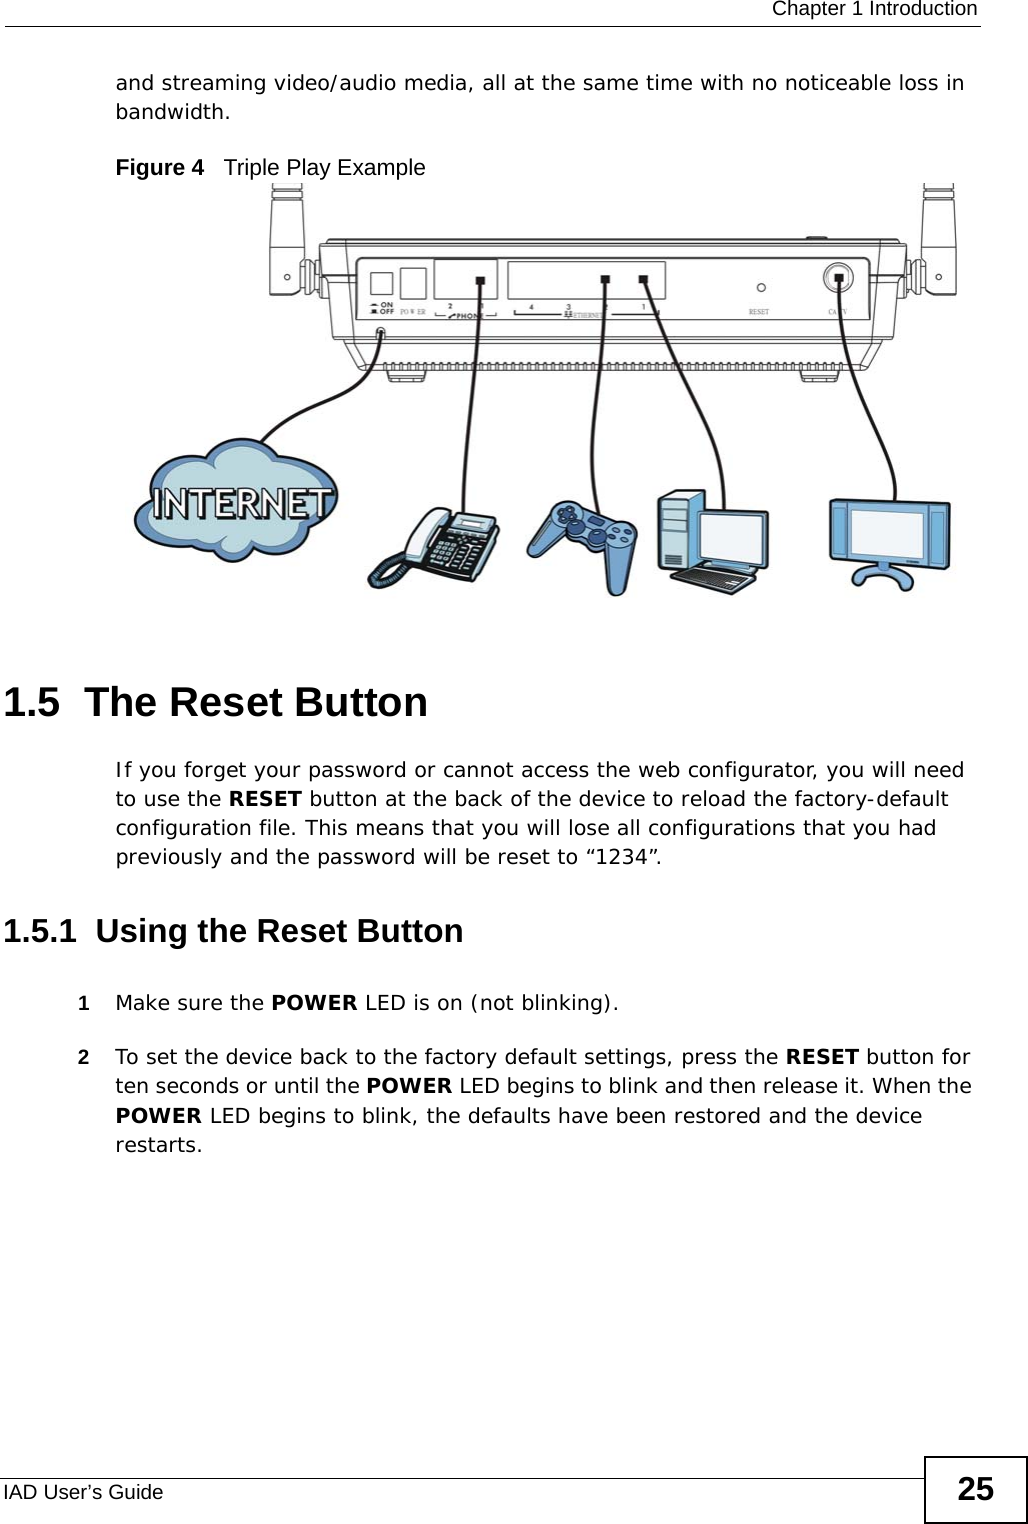  Chapter 1 IntroductionIAD User’s Guide 25and streaming video/audio media, all at the same time with no noticeable loss in bandwidth.Figure 4   Triple Play Example1.5  The Reset ButtonIf you forget your password or cannot access the web configurator, you will need to use the RESET button at the back of the device to reload the factory-default configuration file. This means that you will lose all configurations that you had previously and the password will be reset to “1234”.1.5.1  Using the Reset Button1Make sure the POWER LED is on (not blinking).2To set the device back to the factory default settings, press the RESET button for ten seconds or until the POWER LED begins to blink and then release it. When the POWER LED begins to blink, the defaults have been restored and the device restarts.